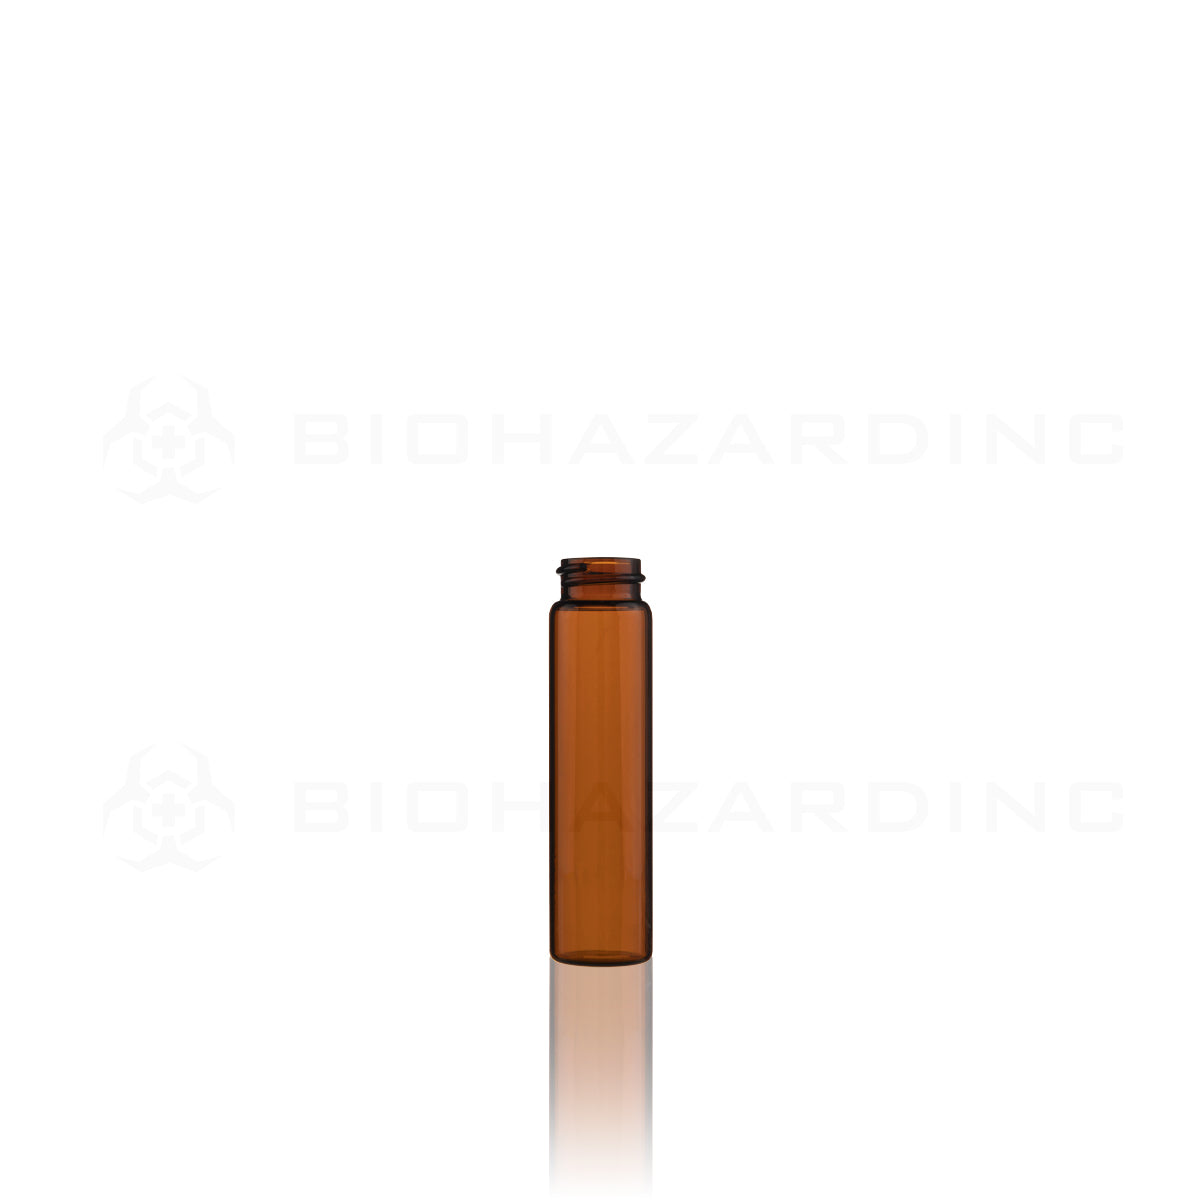 Glass Vial | Amber Glass Pre-Roll Tube | Dropper Caps Included - 8 Dram - 169 Count Glass Vial Biohazard Inc   